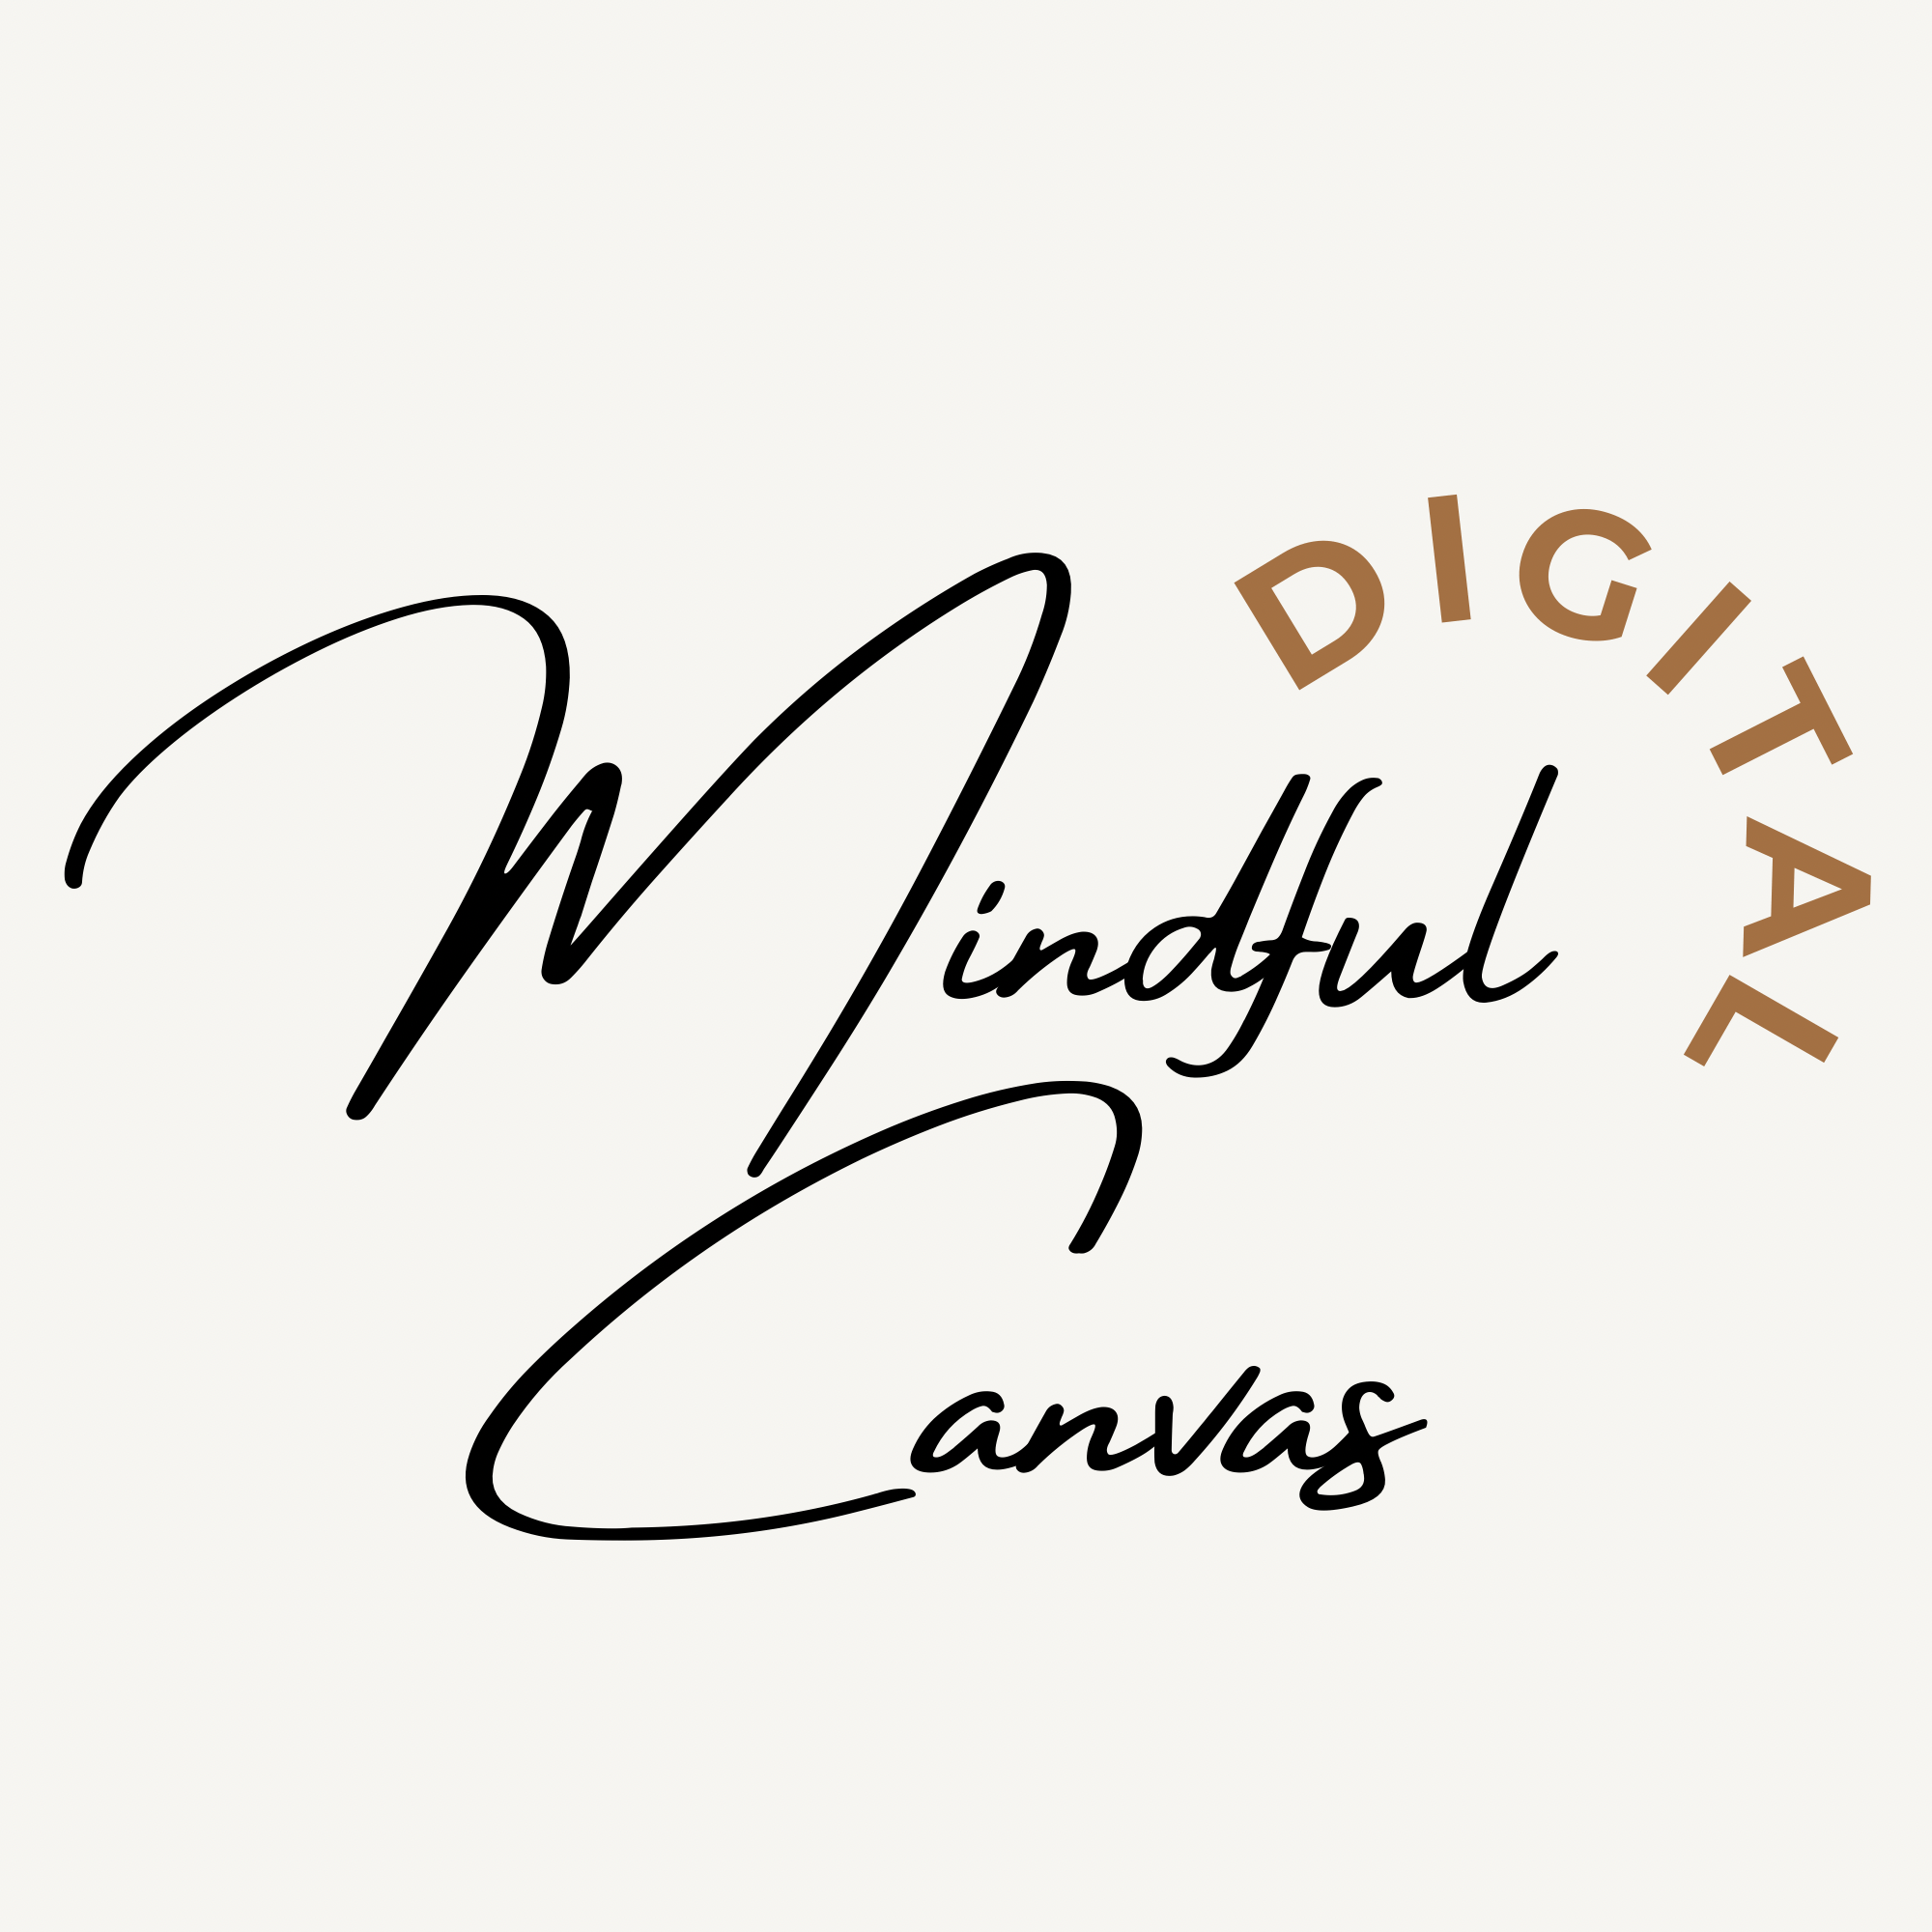 Mindful Canvas Digital Art Therapy